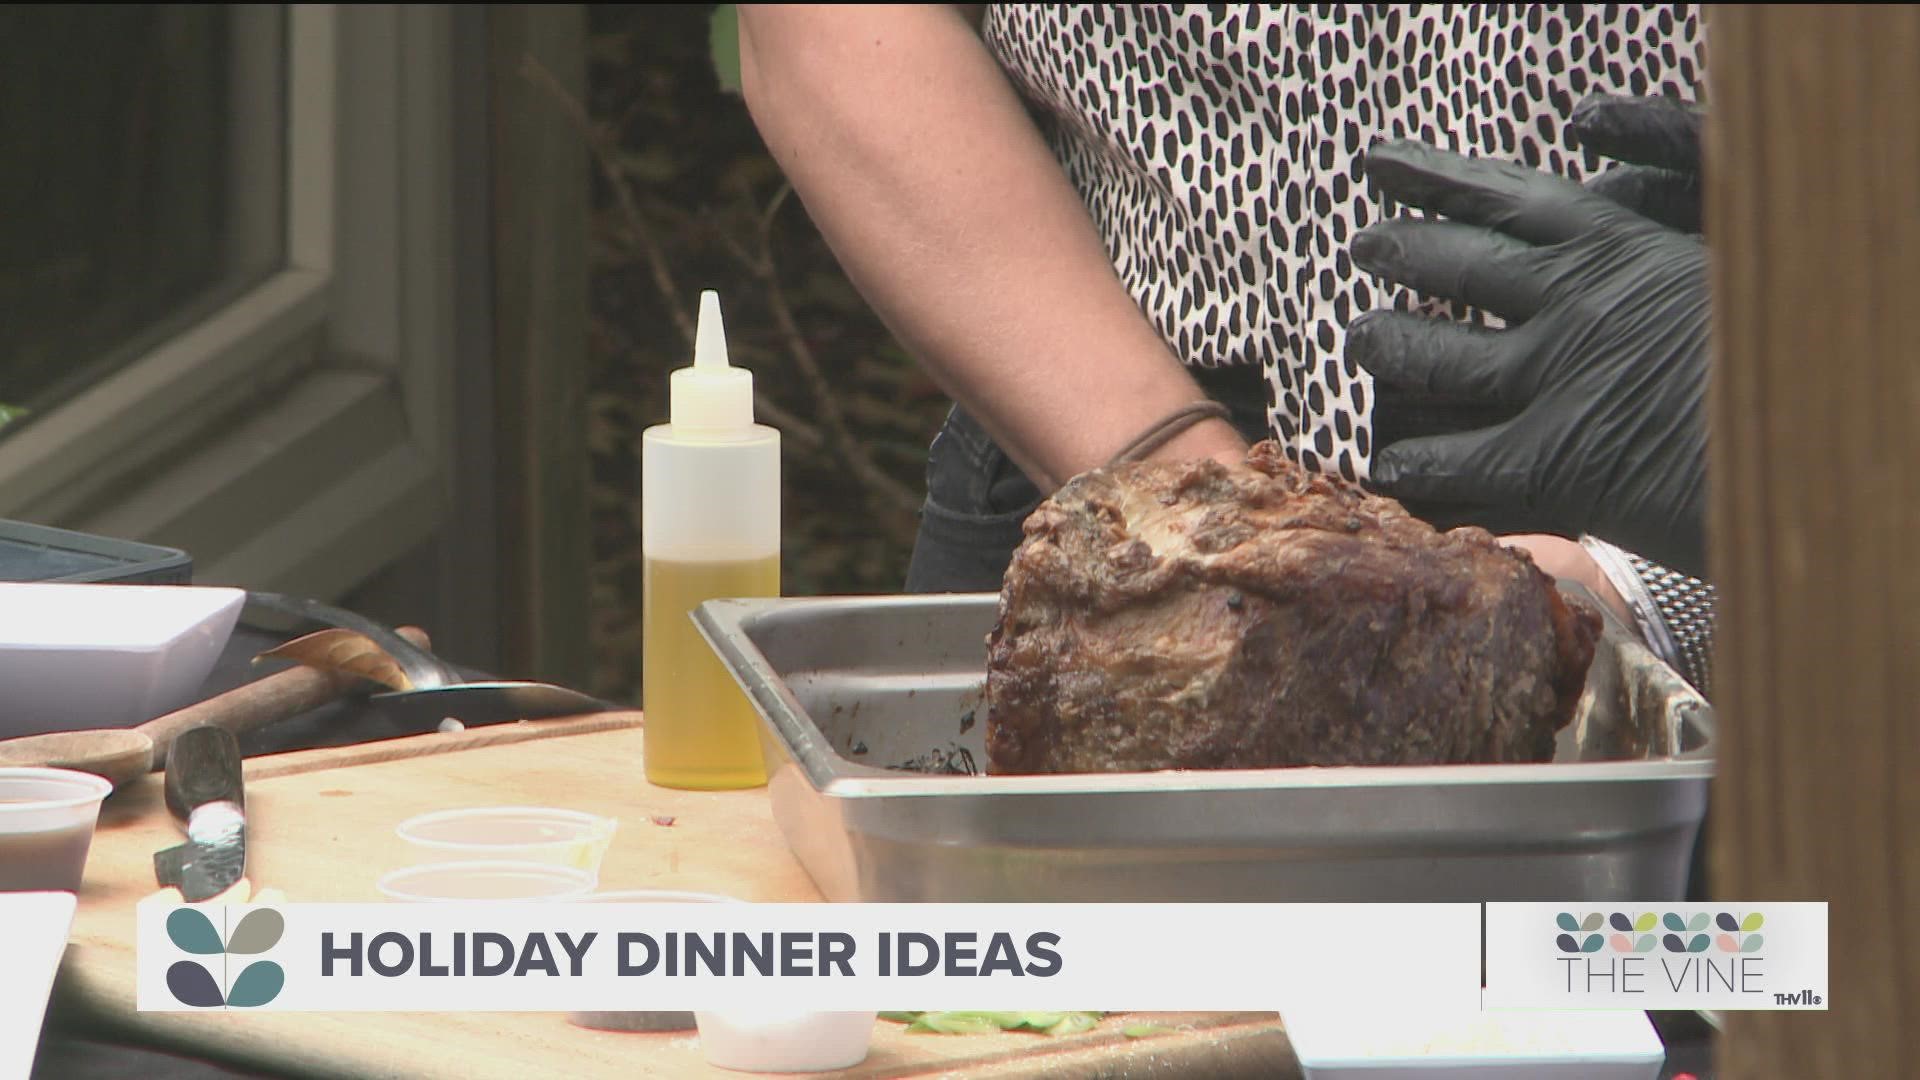 Chef Serge with Vibrant Occasions Catering shares his recipe for Herb-Crusted Slow-Roasted Prime Rib.